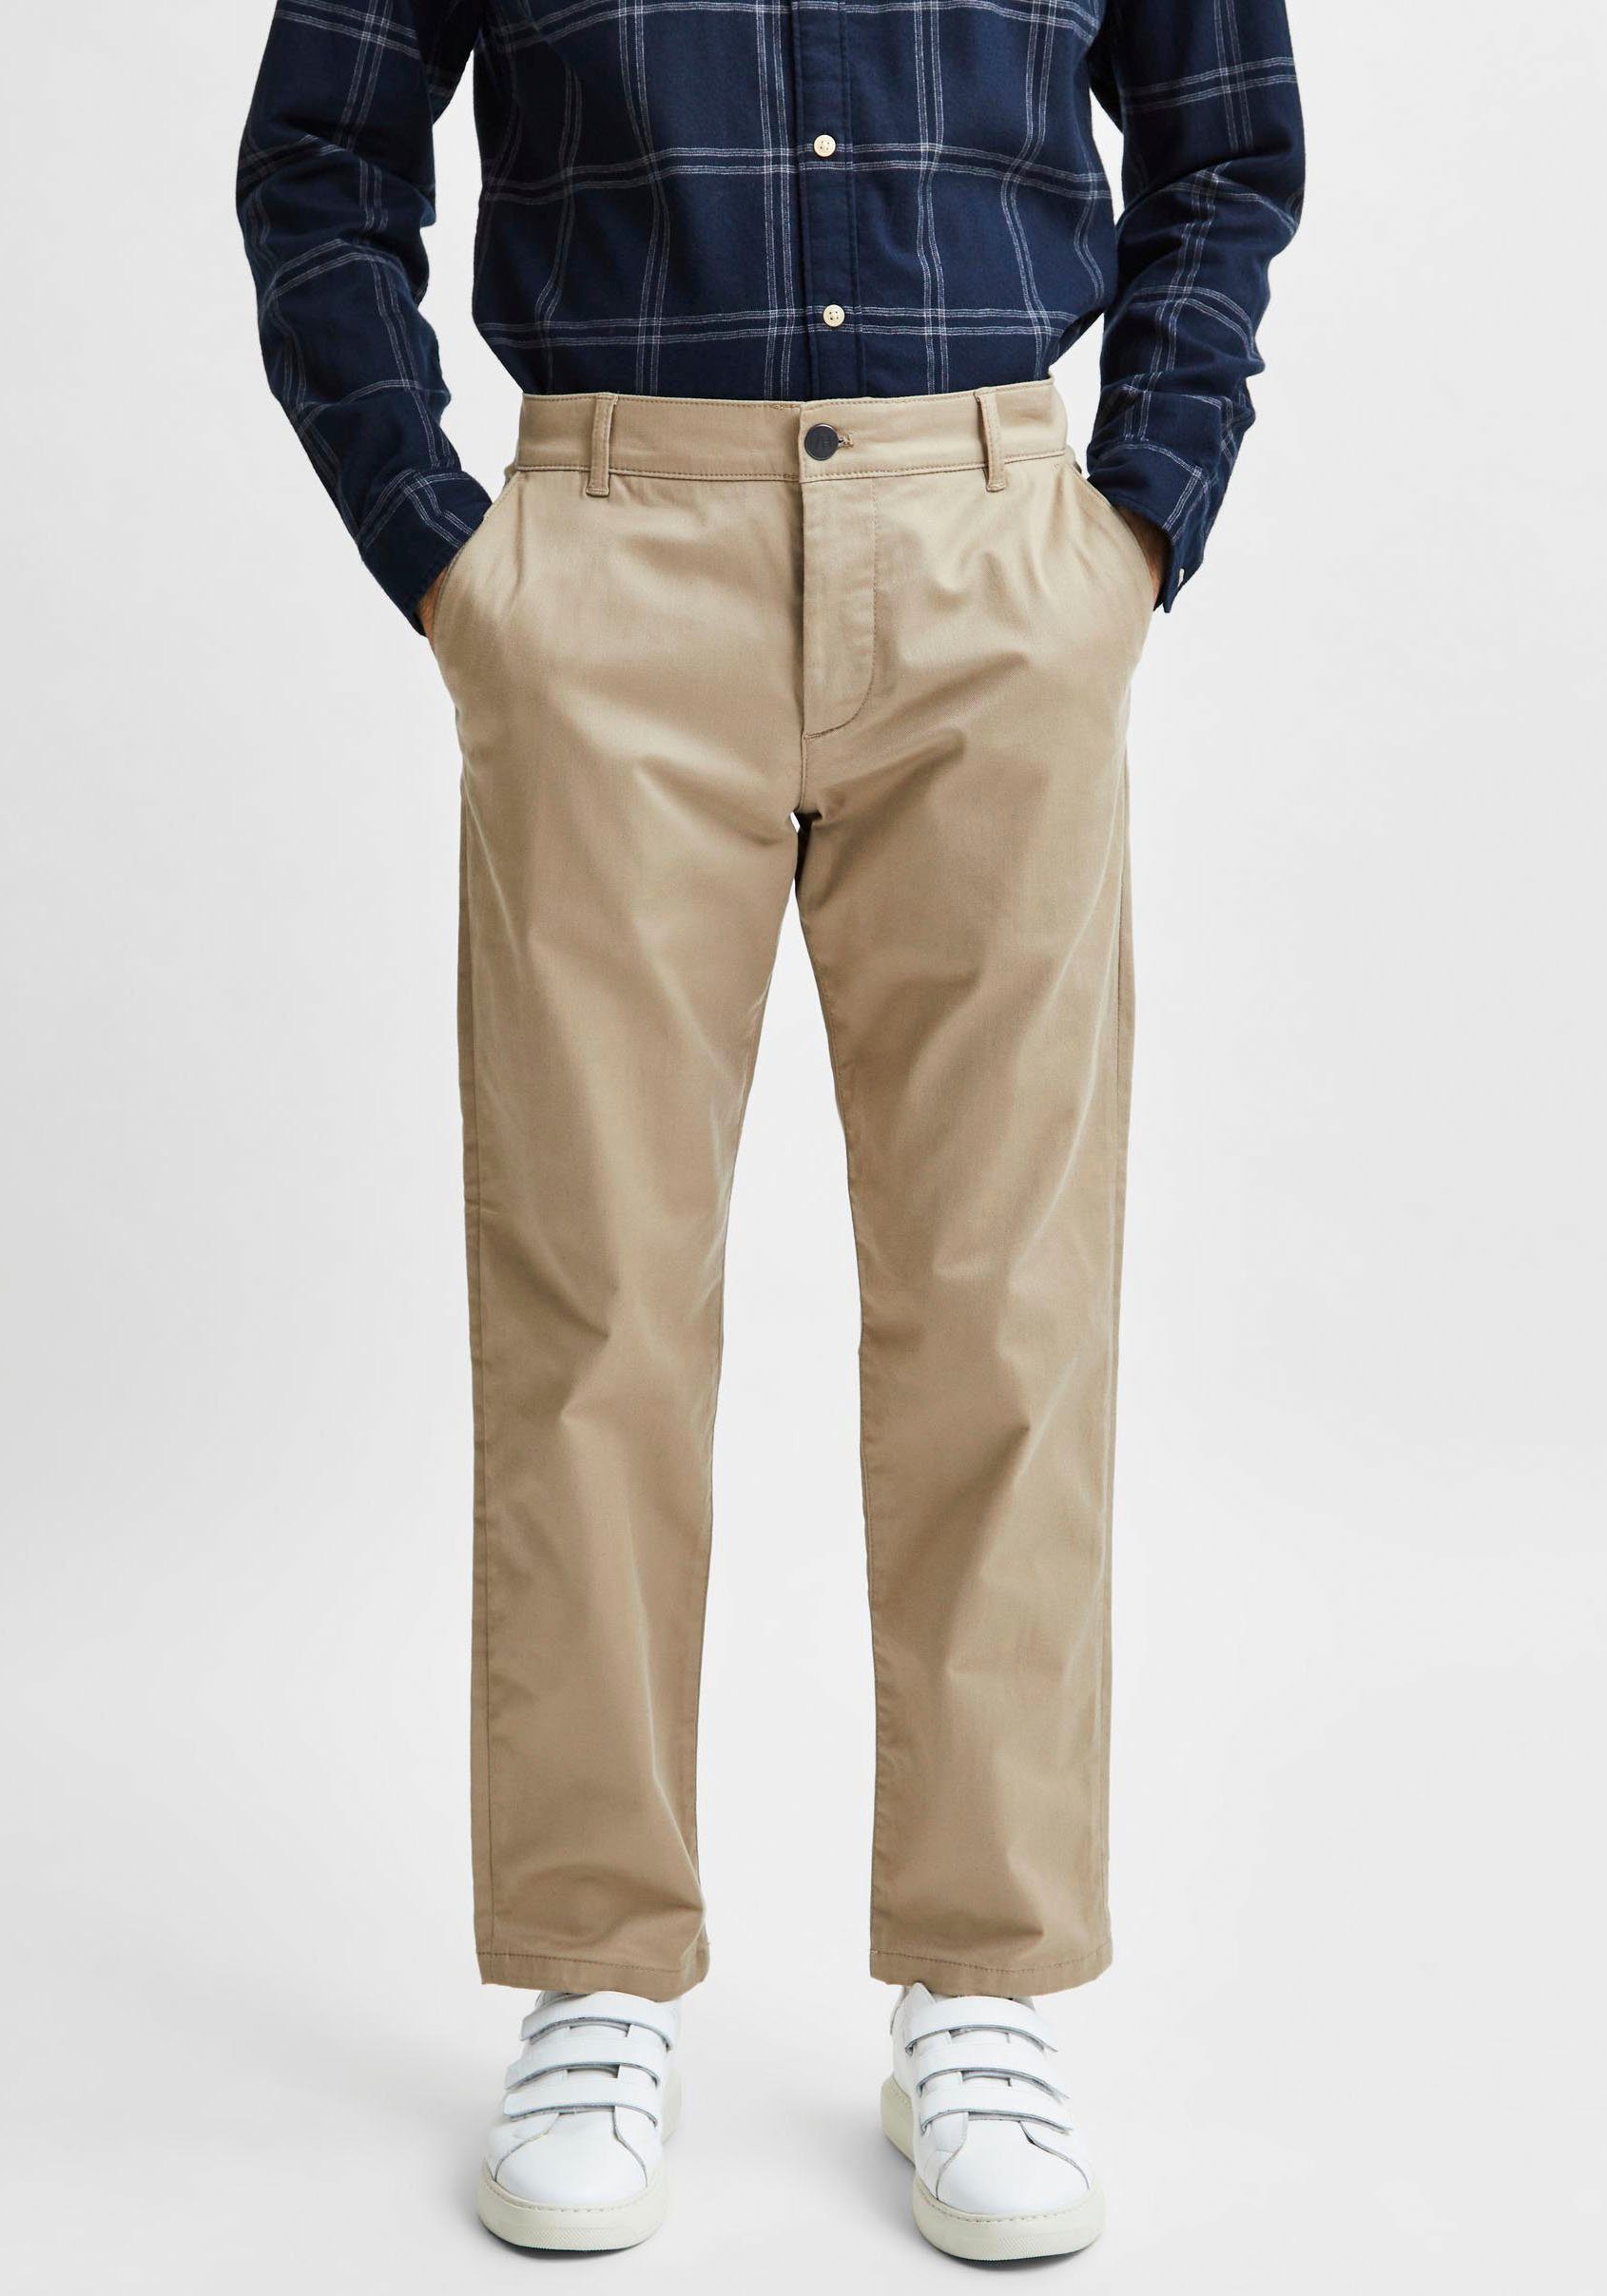 SELECTED HOMME Chinohose SE Chino